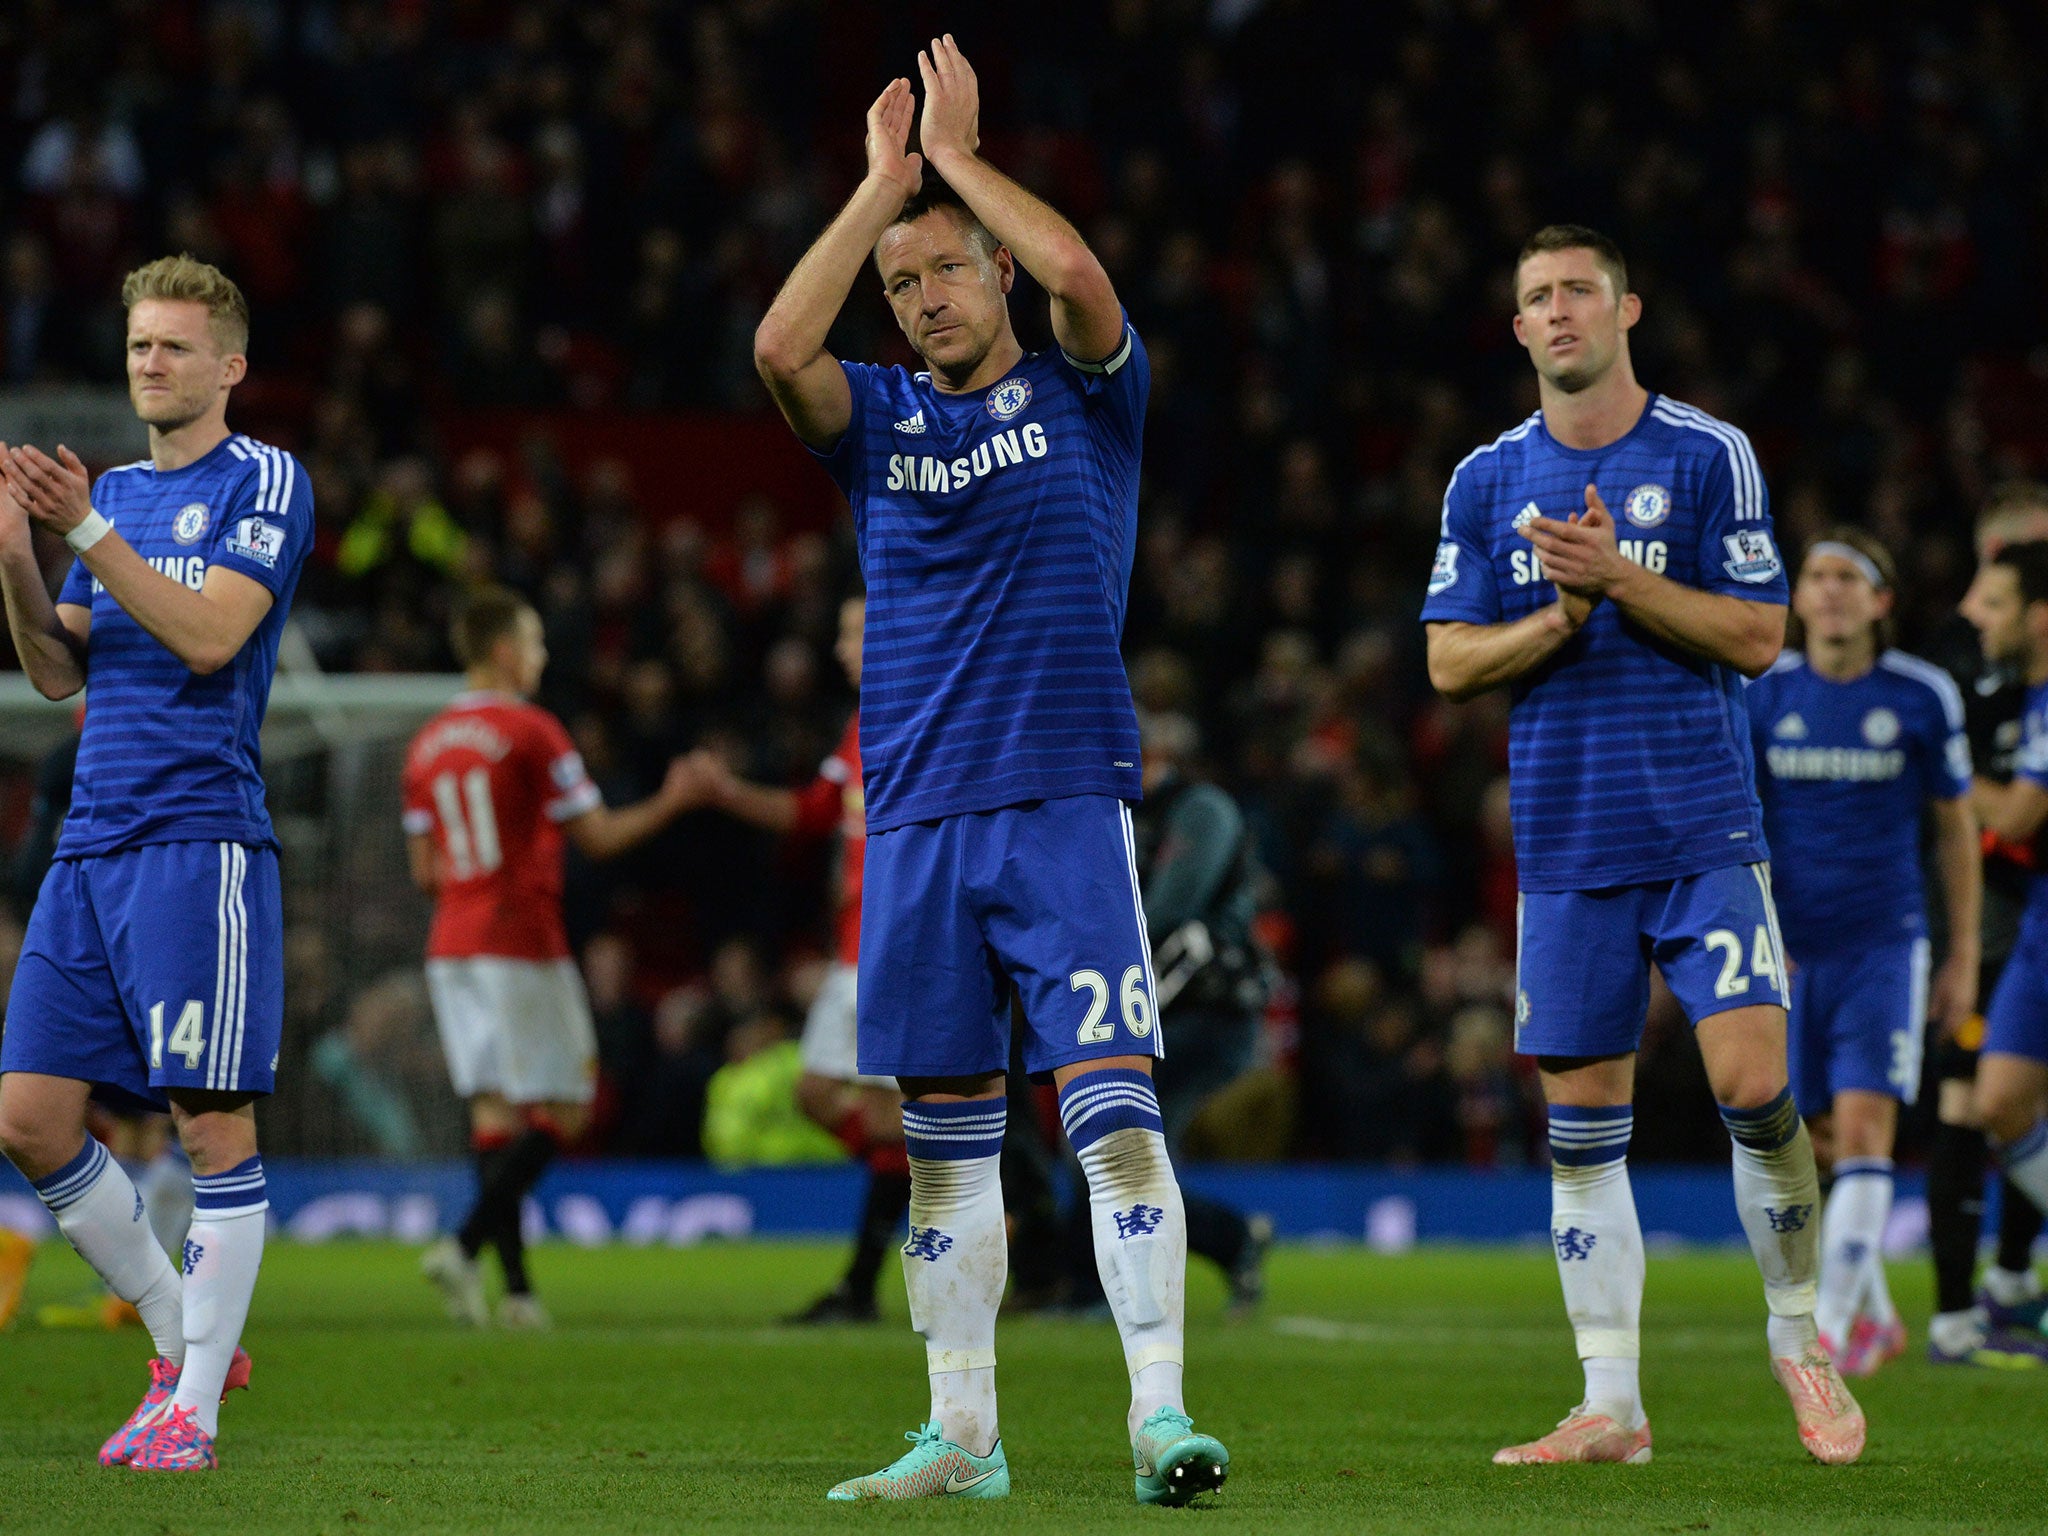 Chelsea captain John Terry applauds the crowd following the draw with Manchester United